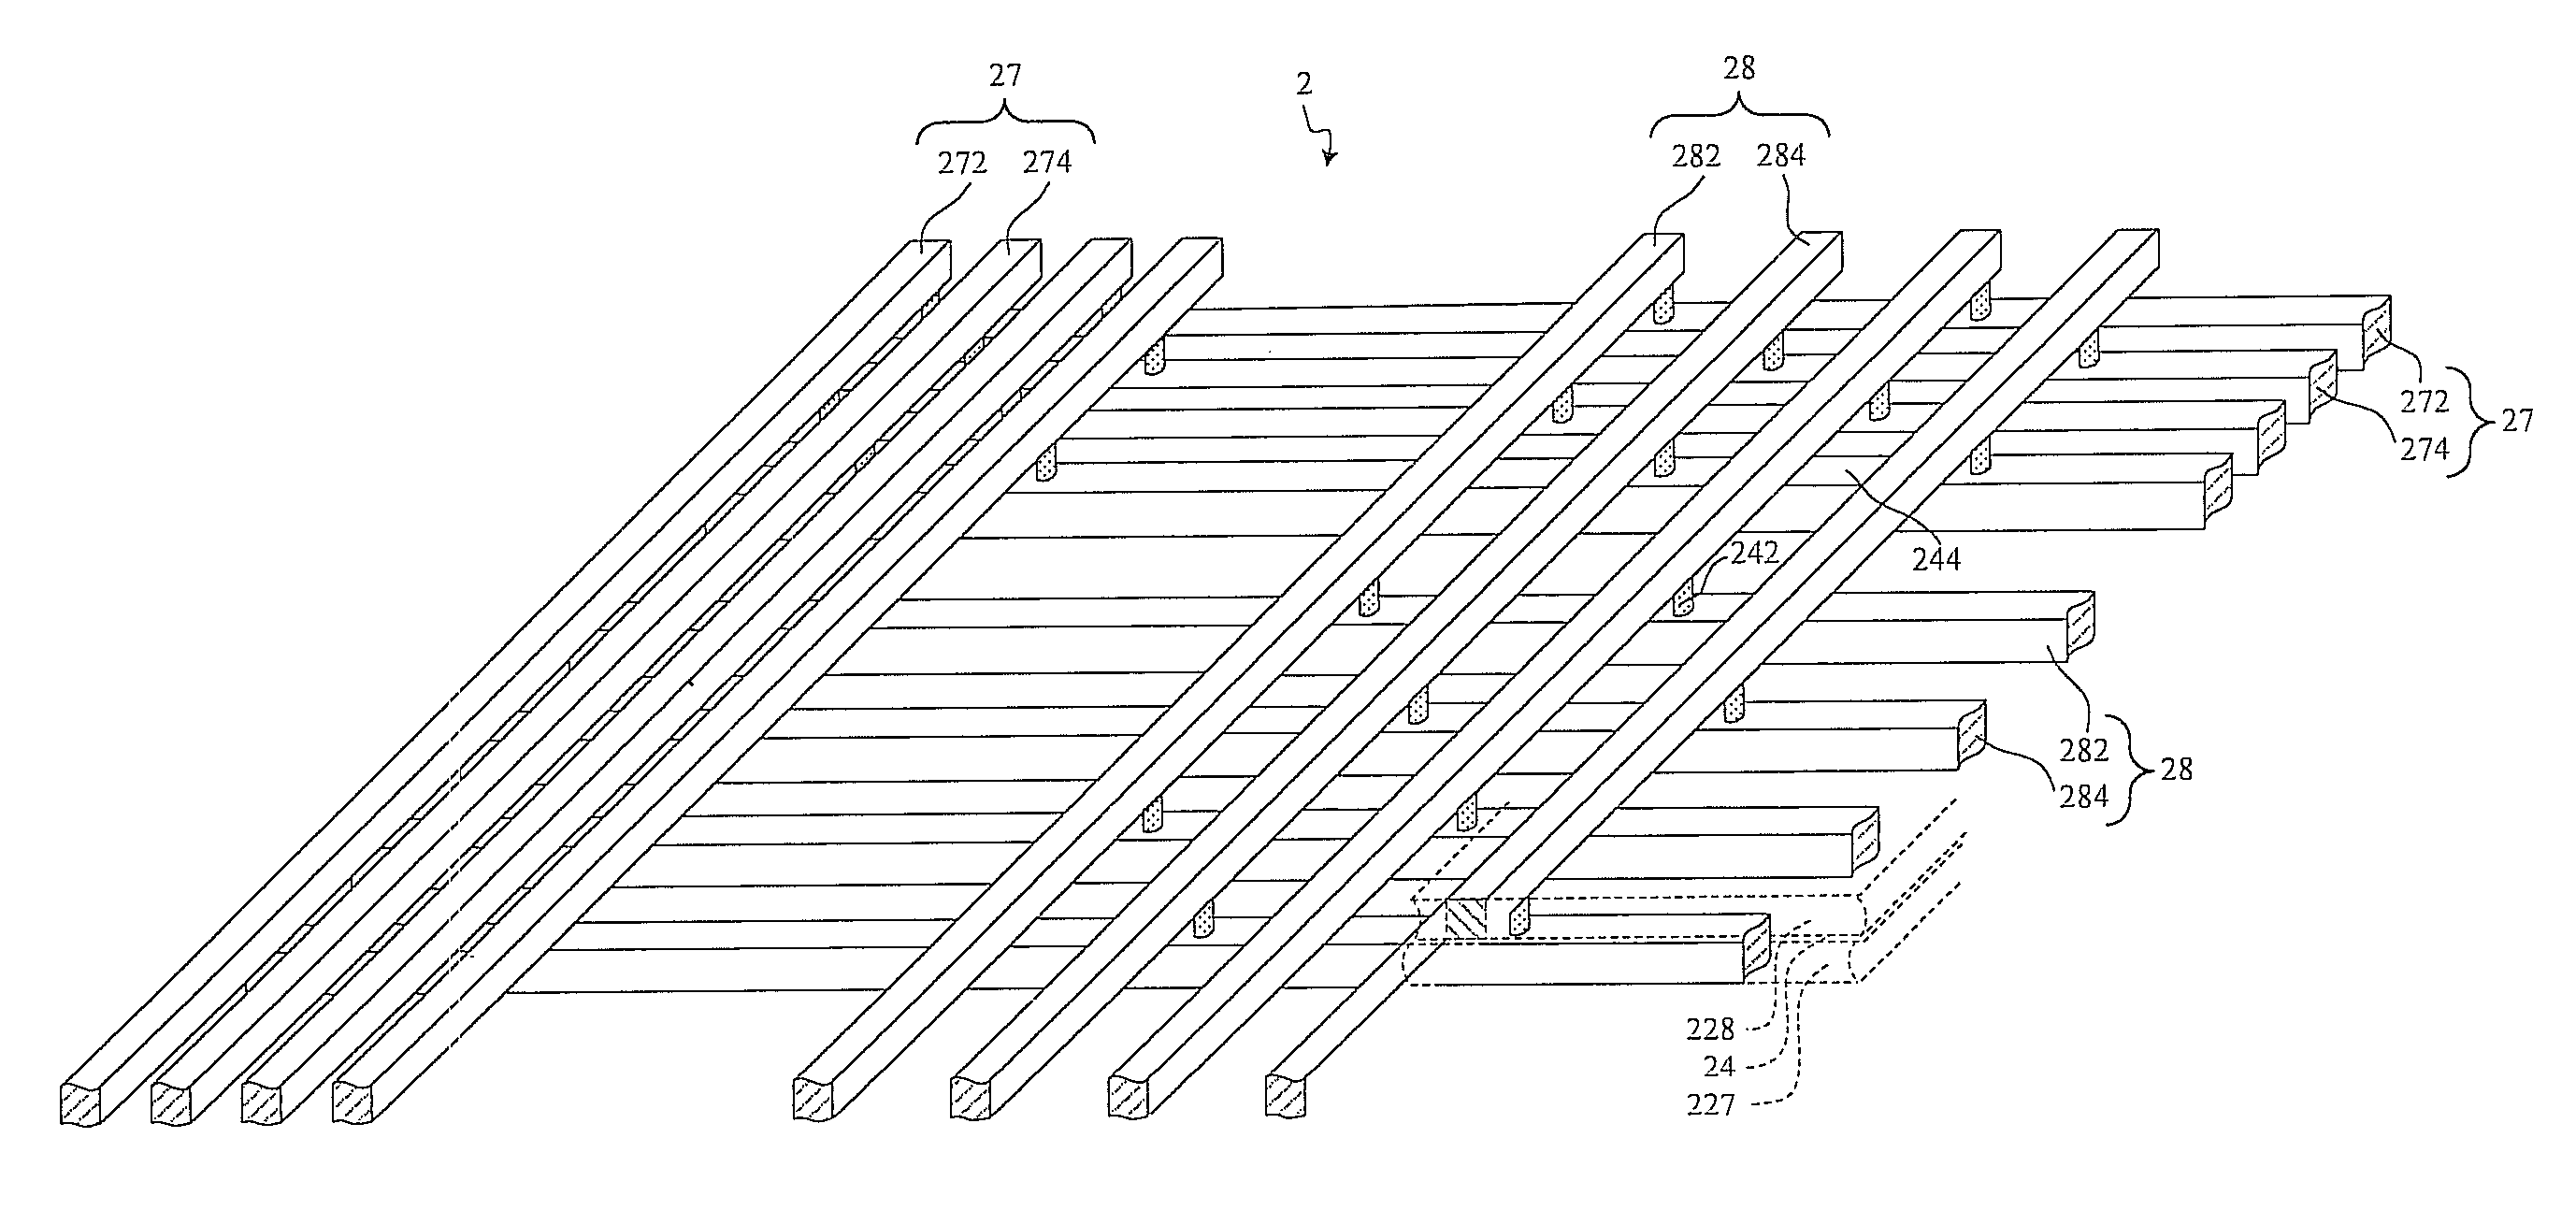 Power layout of integrated circuits and designing method thereof